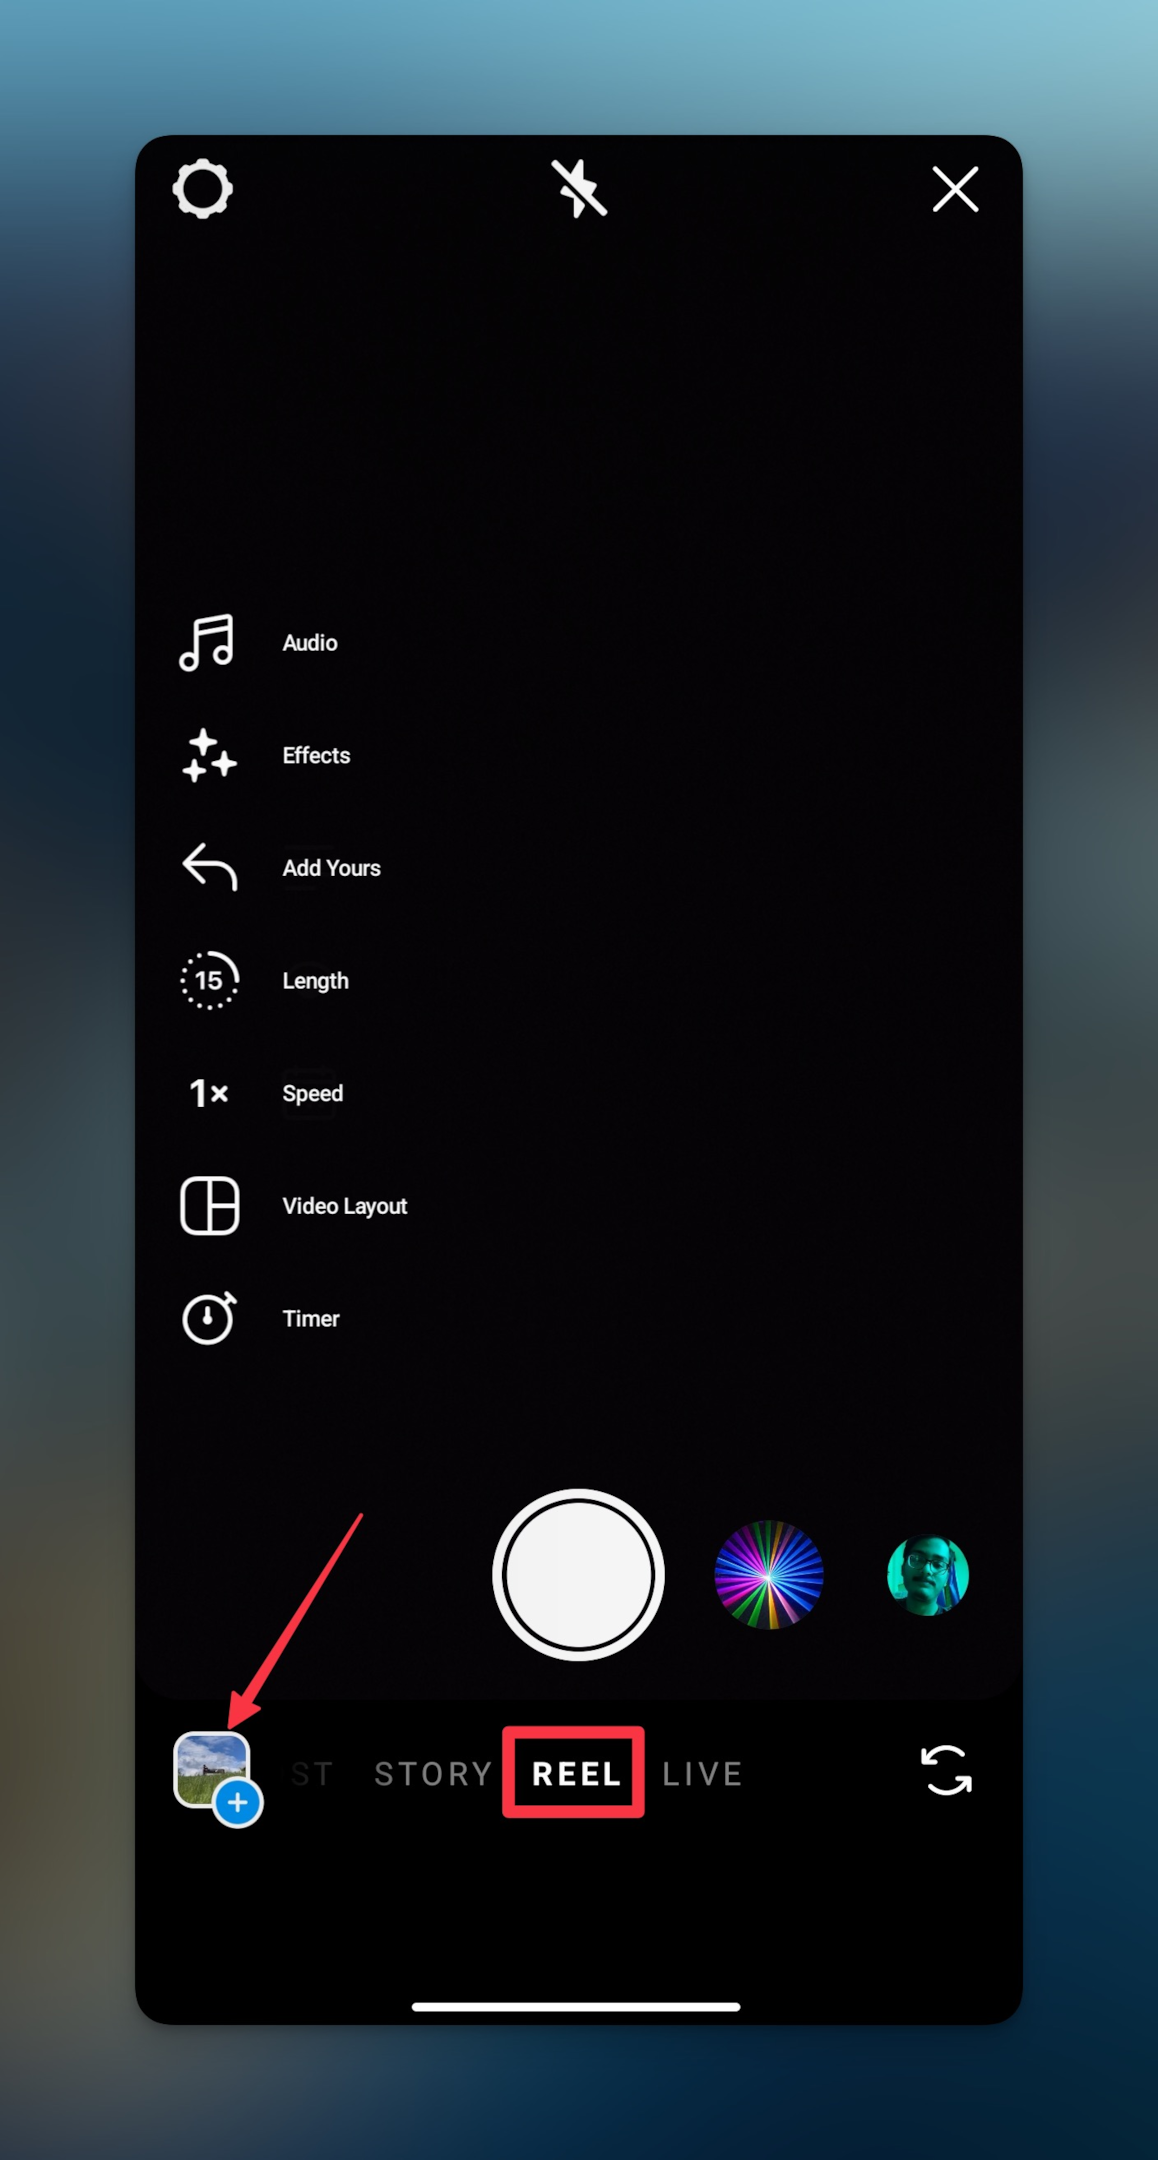 Remote.tools show how to swipe to reels screen & tap on gallery icon to make Instagram reels